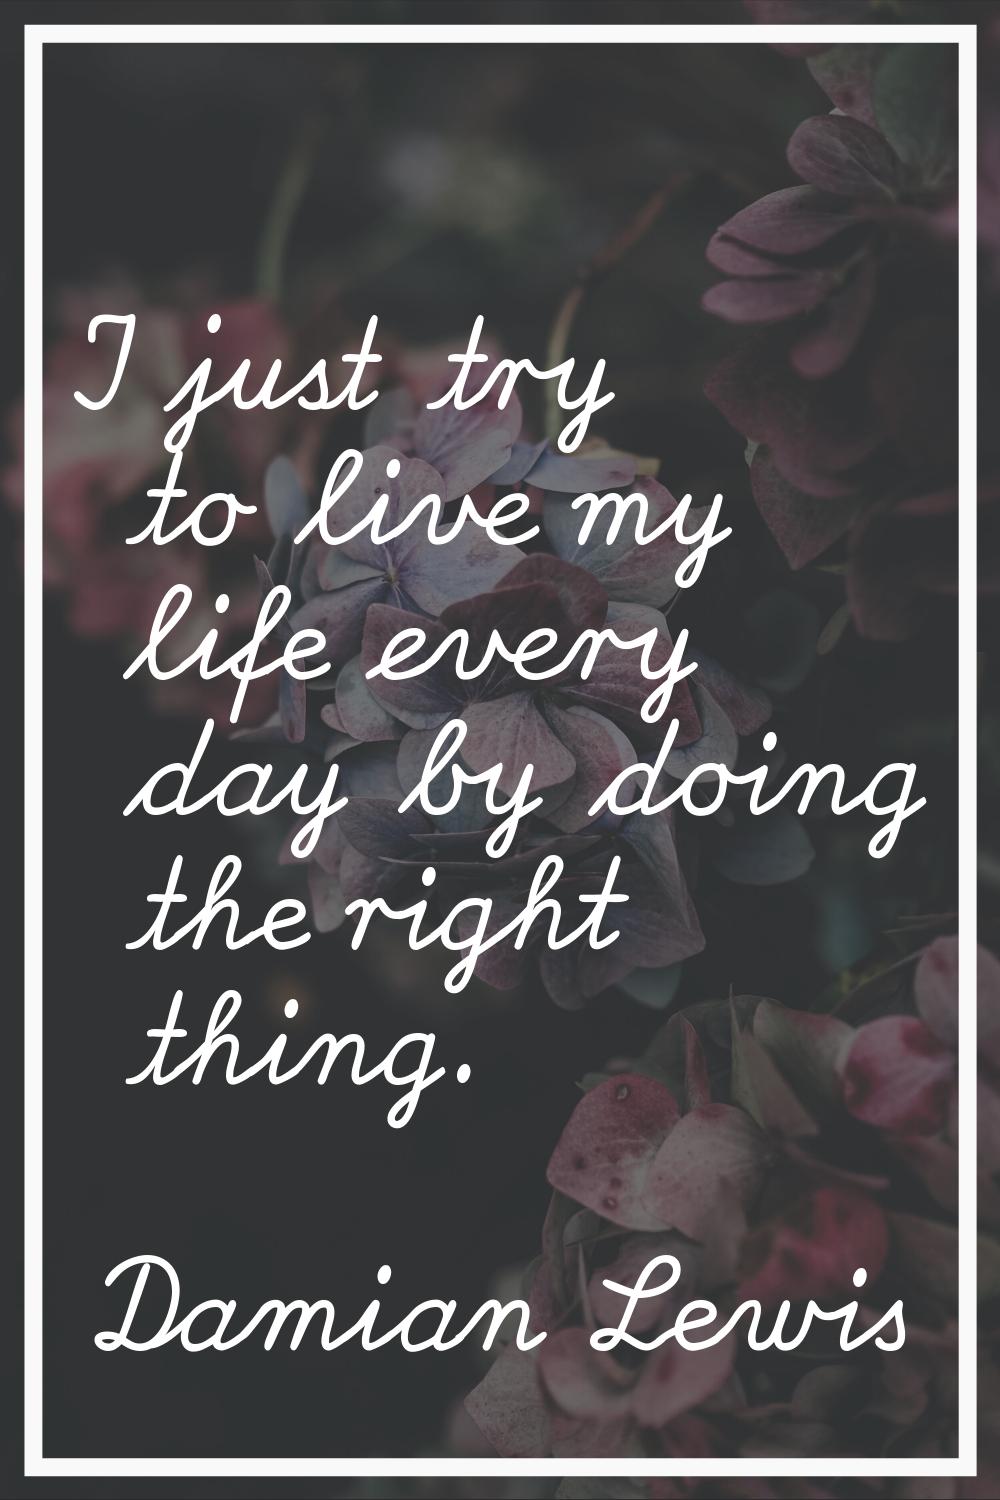 I just try to live my life every day by doing the right thing.